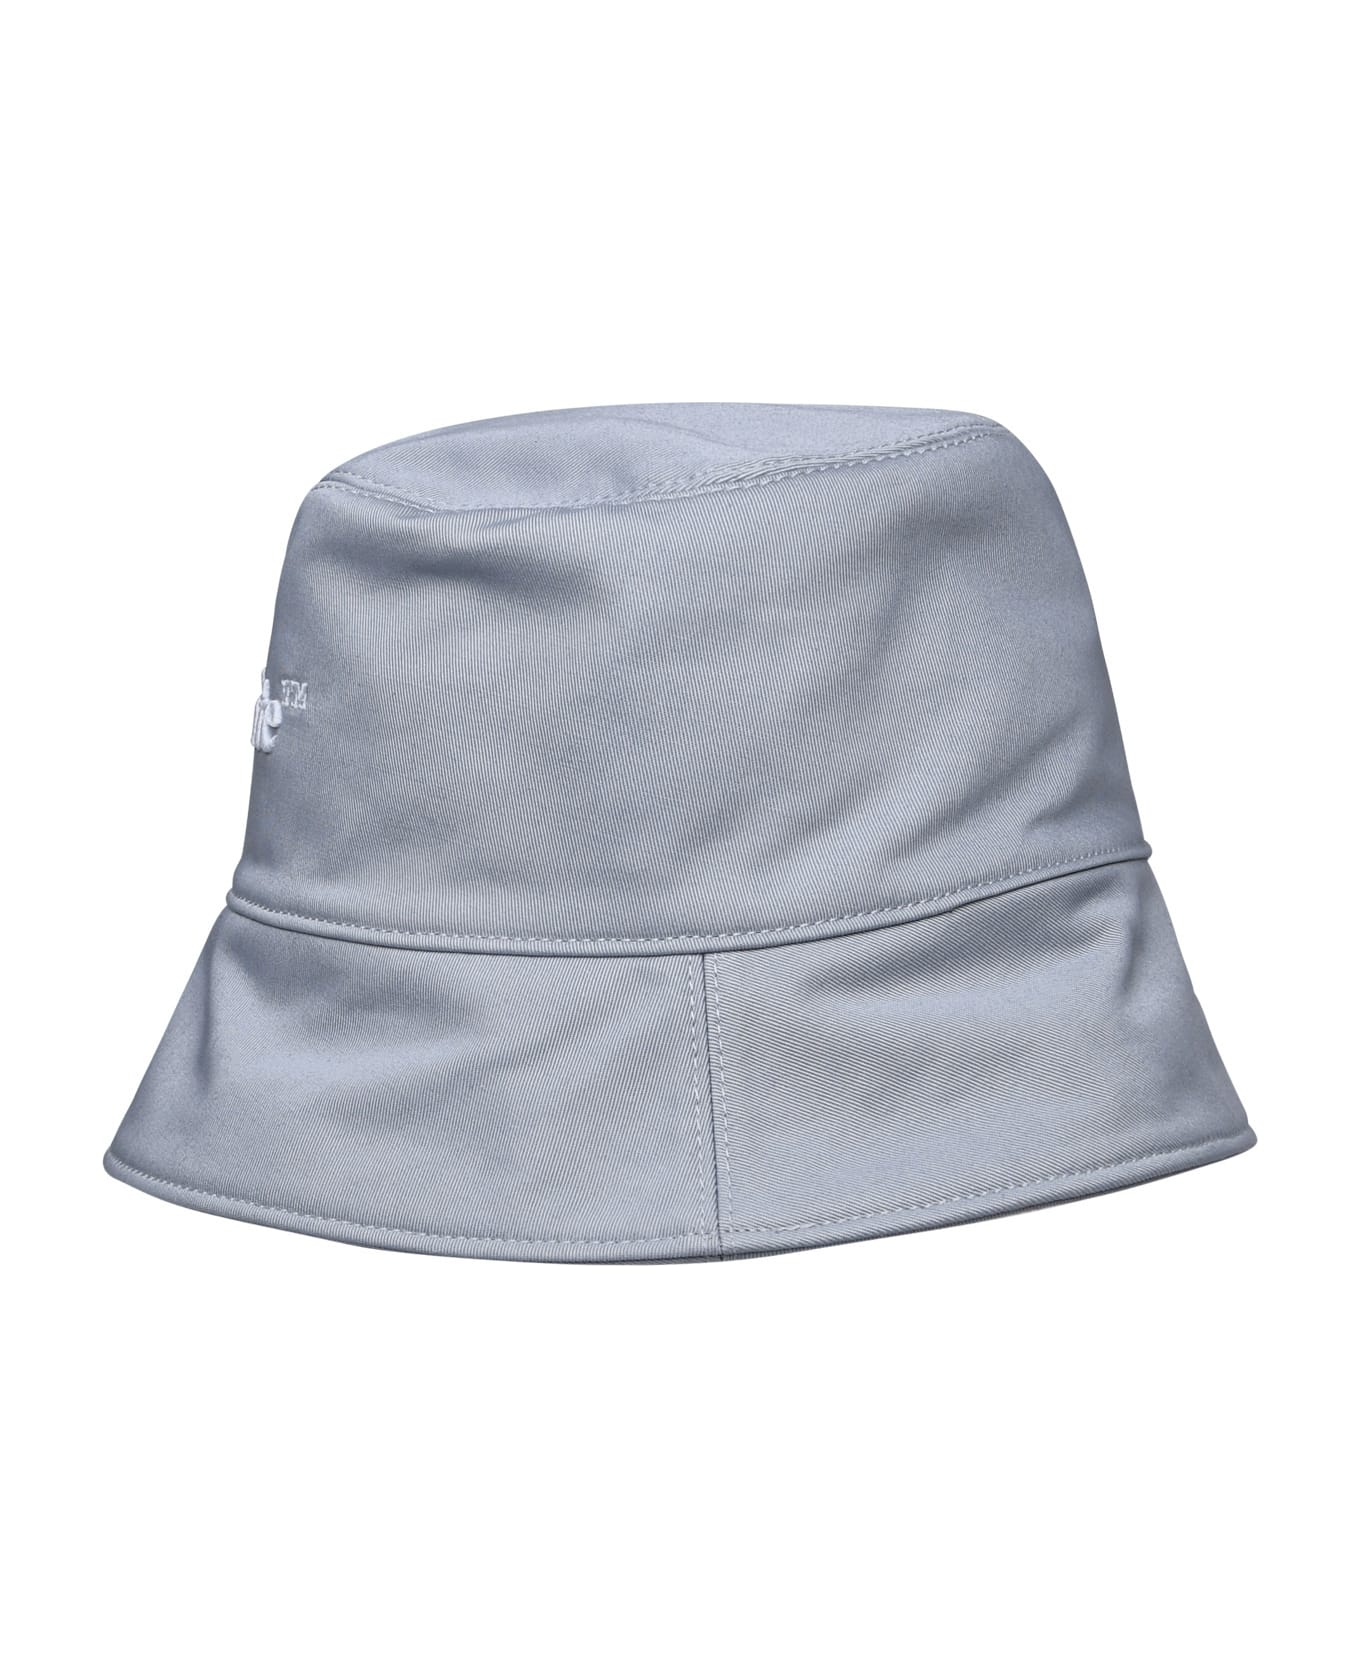 Off-White Logo Embroidered Bucket Hat - Light Blue